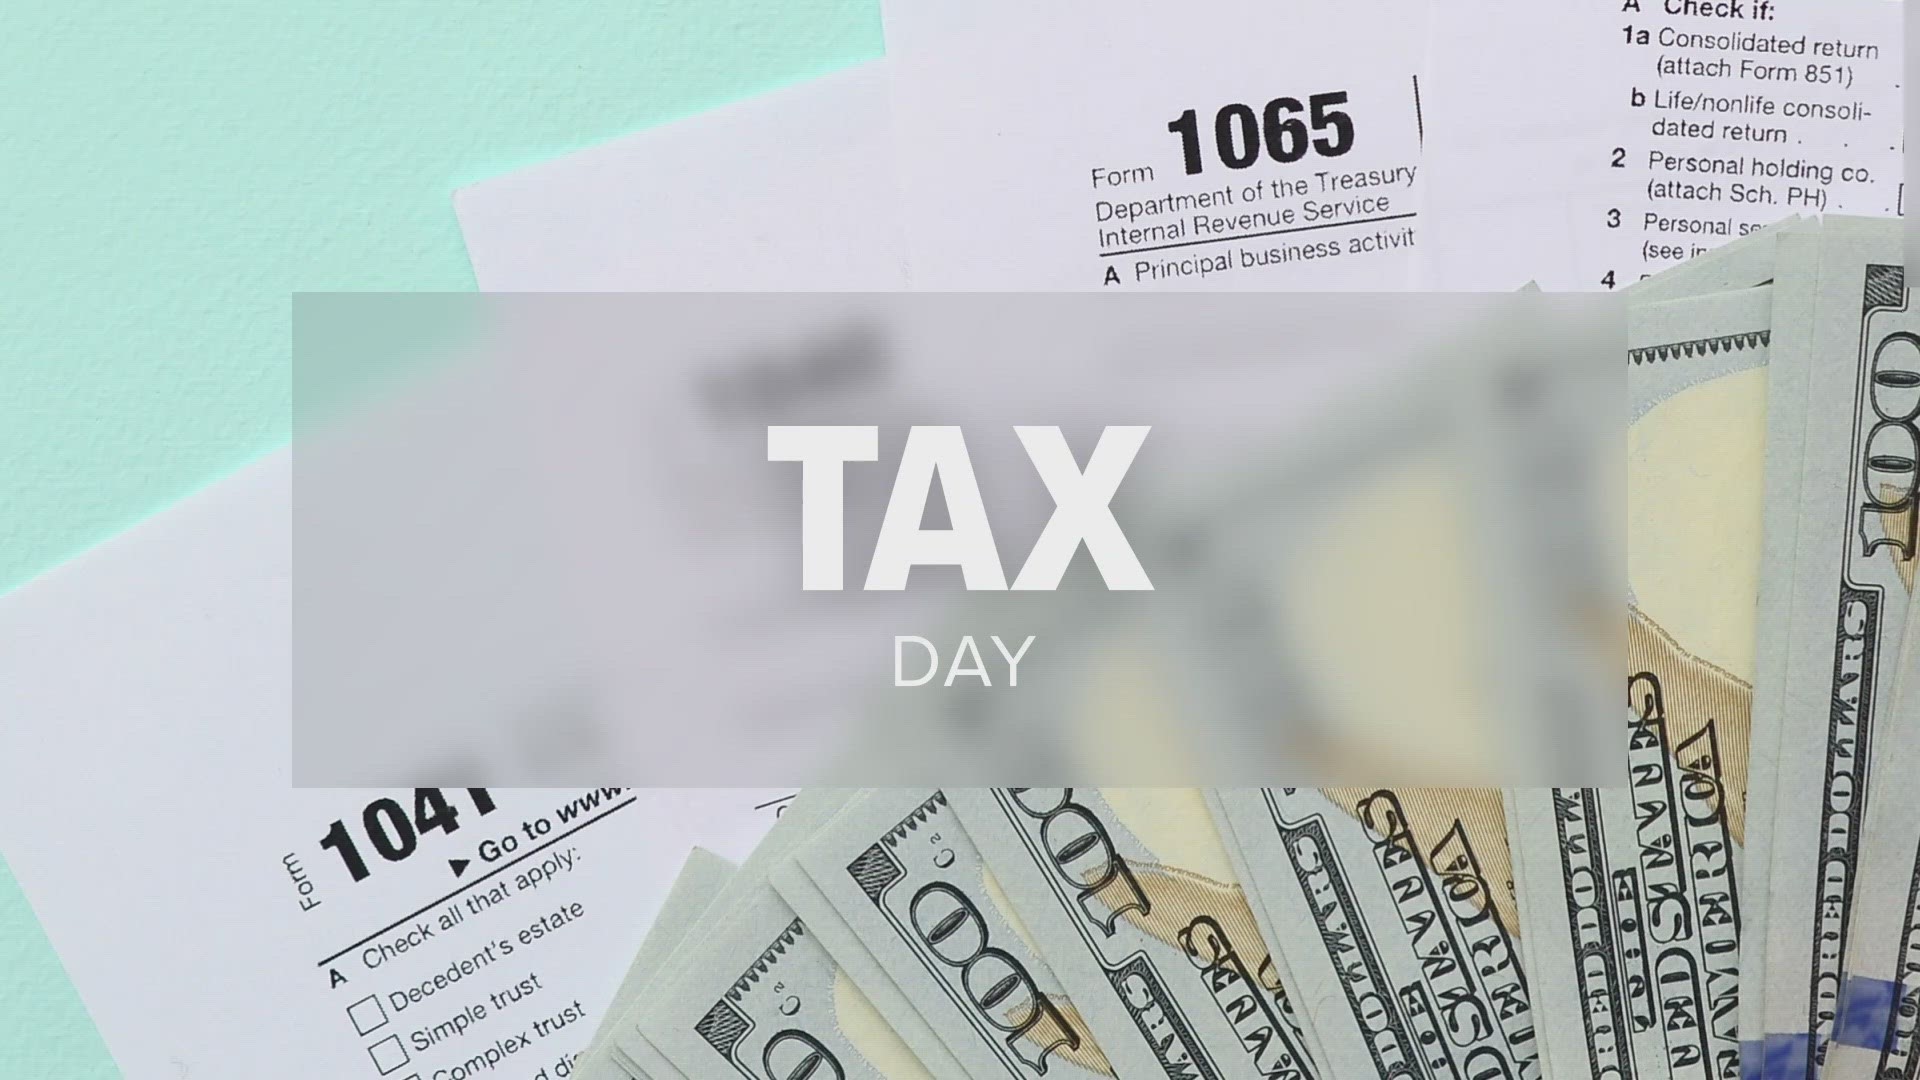 Tax Day is the deadline for people who received individual income to file for a return or make a tax payment.